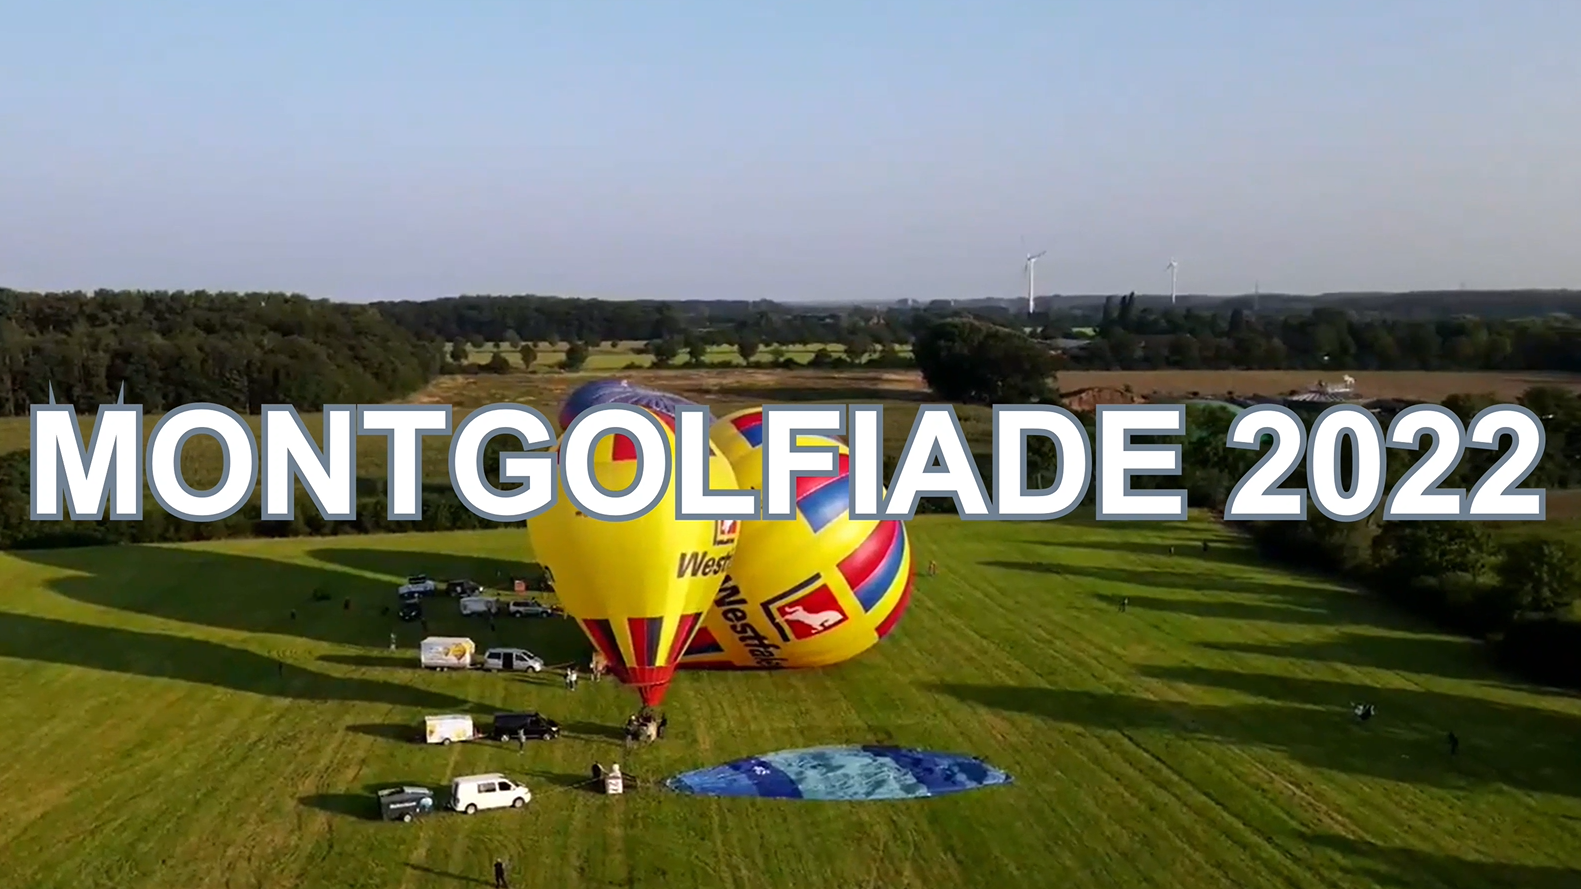 You are currently viewing 51. Montgolfiade soll in Münster stattfinden